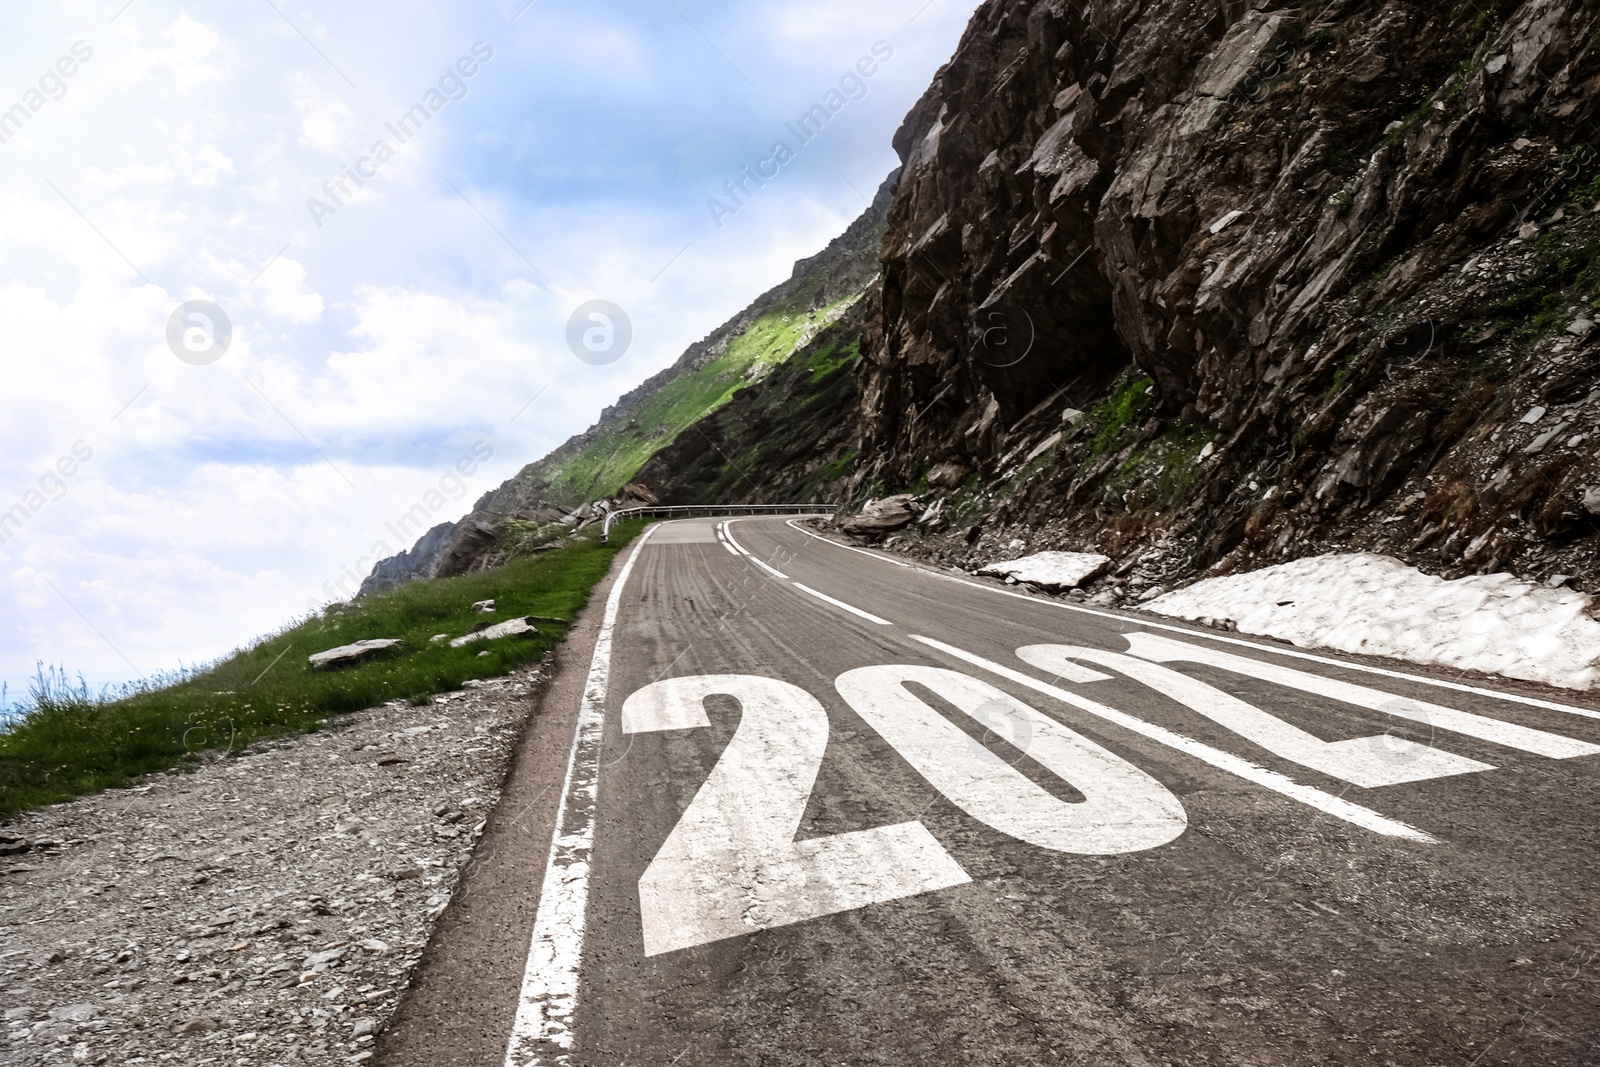 Image of Start new year with fresh vision and ideas. Asphalt road with 2021 numbers in mountains